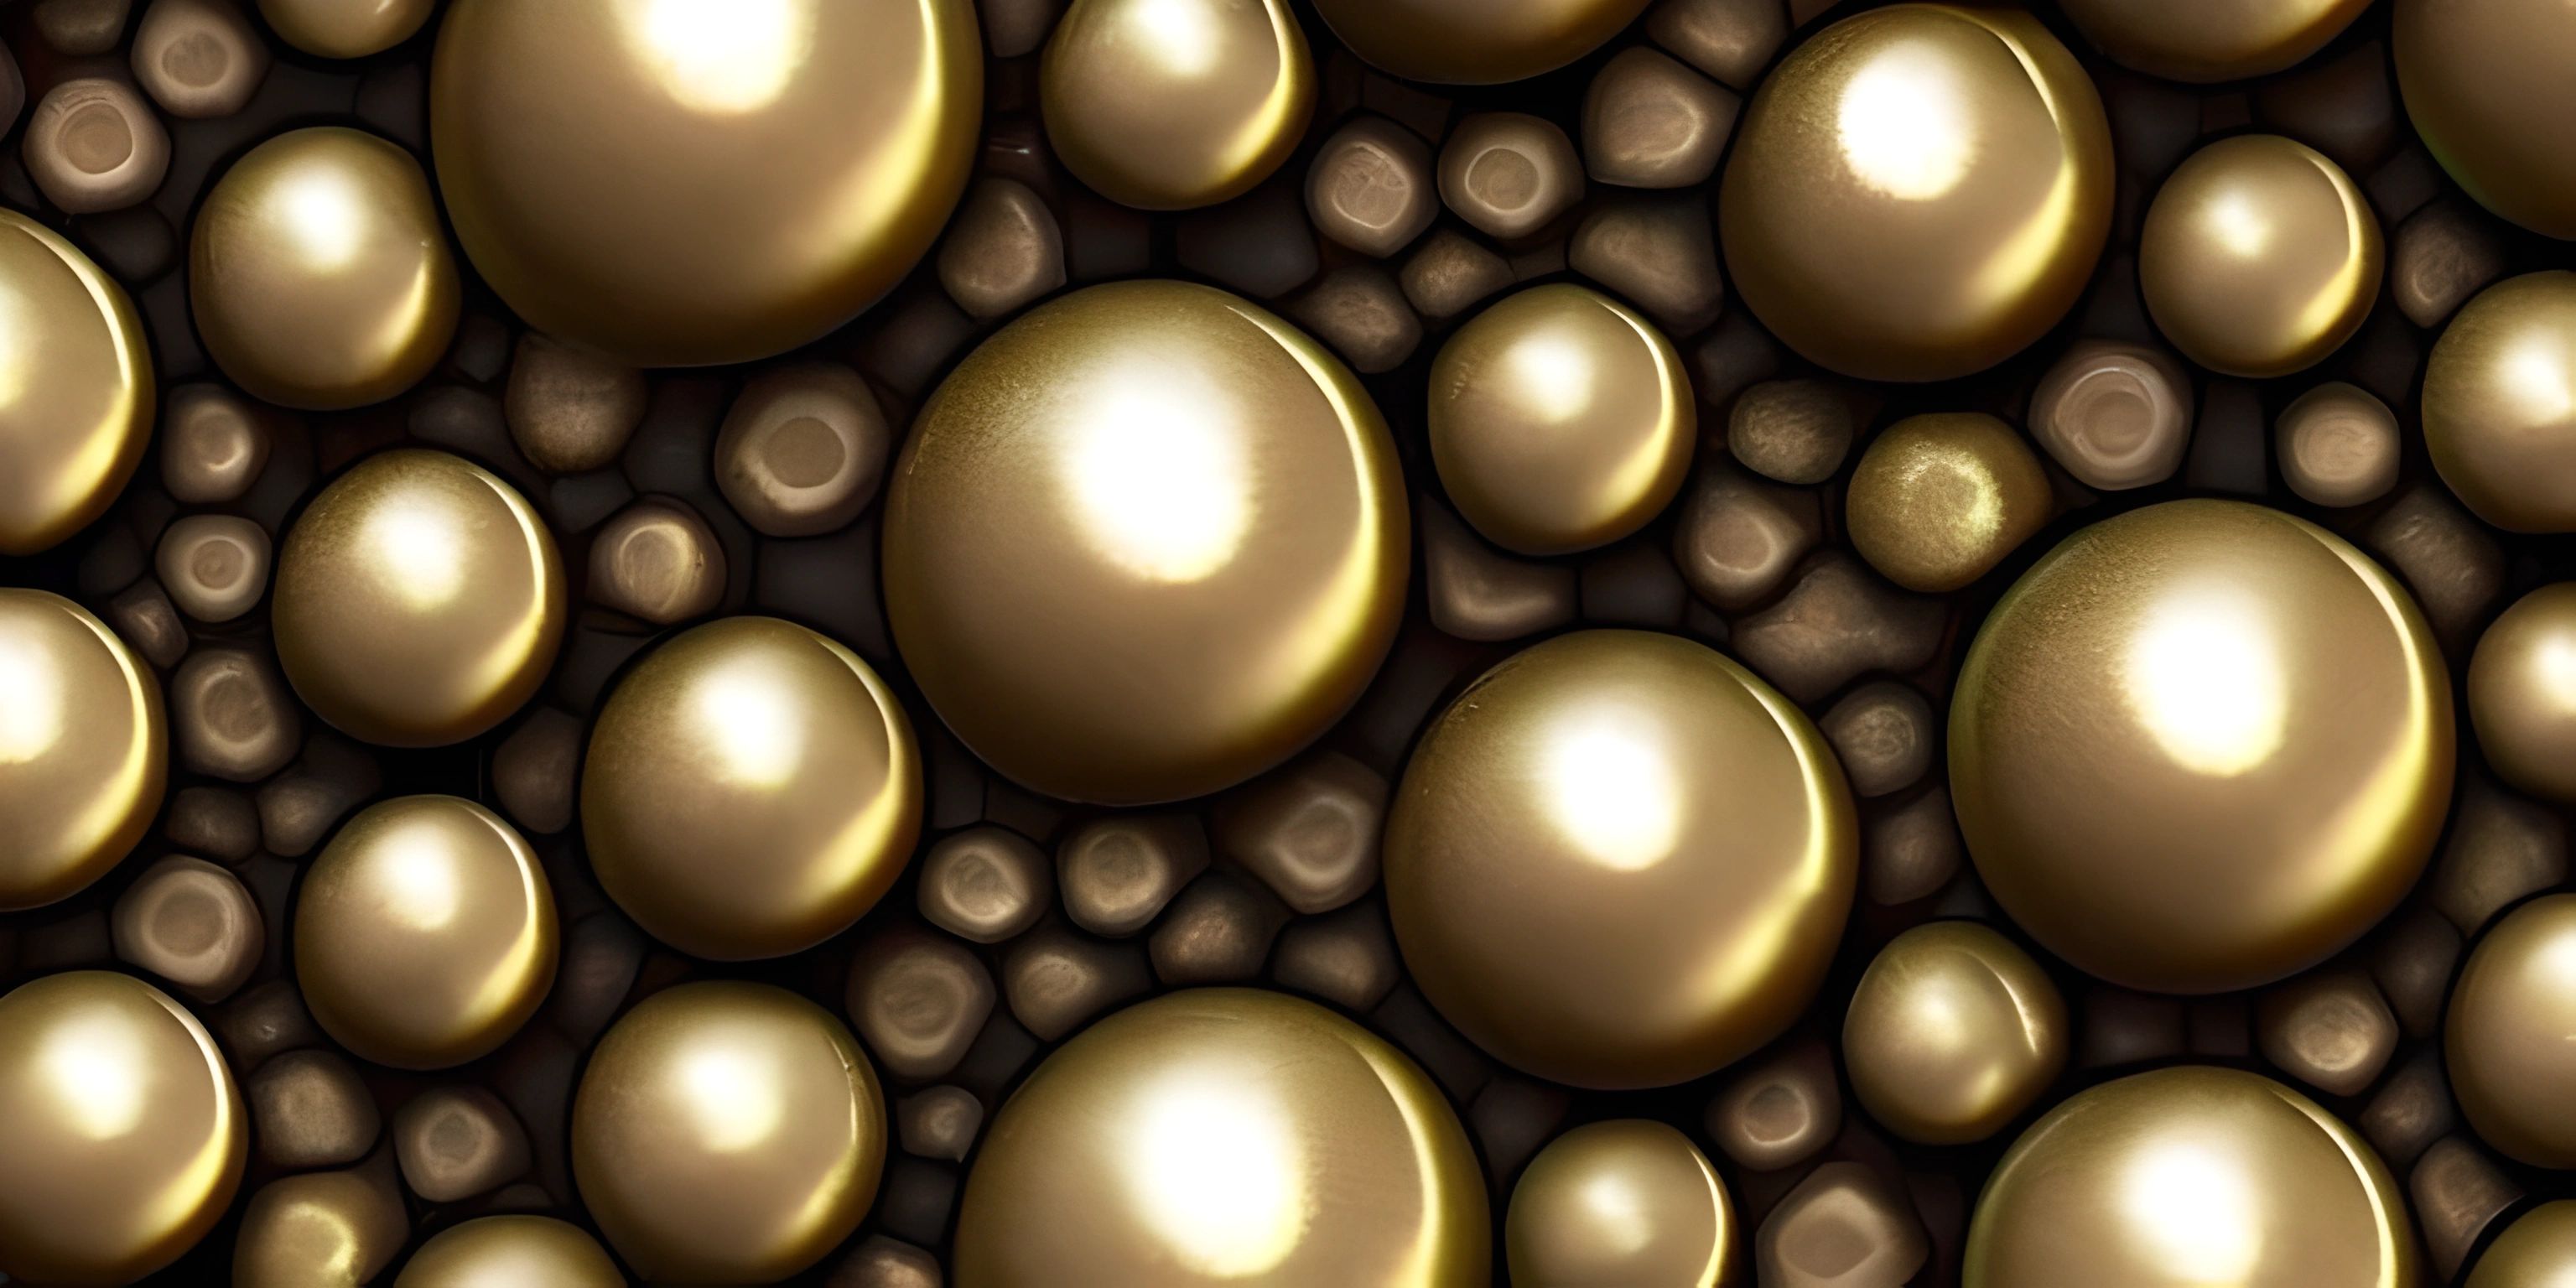 a lot of shiny gold eggs laying in a pile on top of each other of a black background